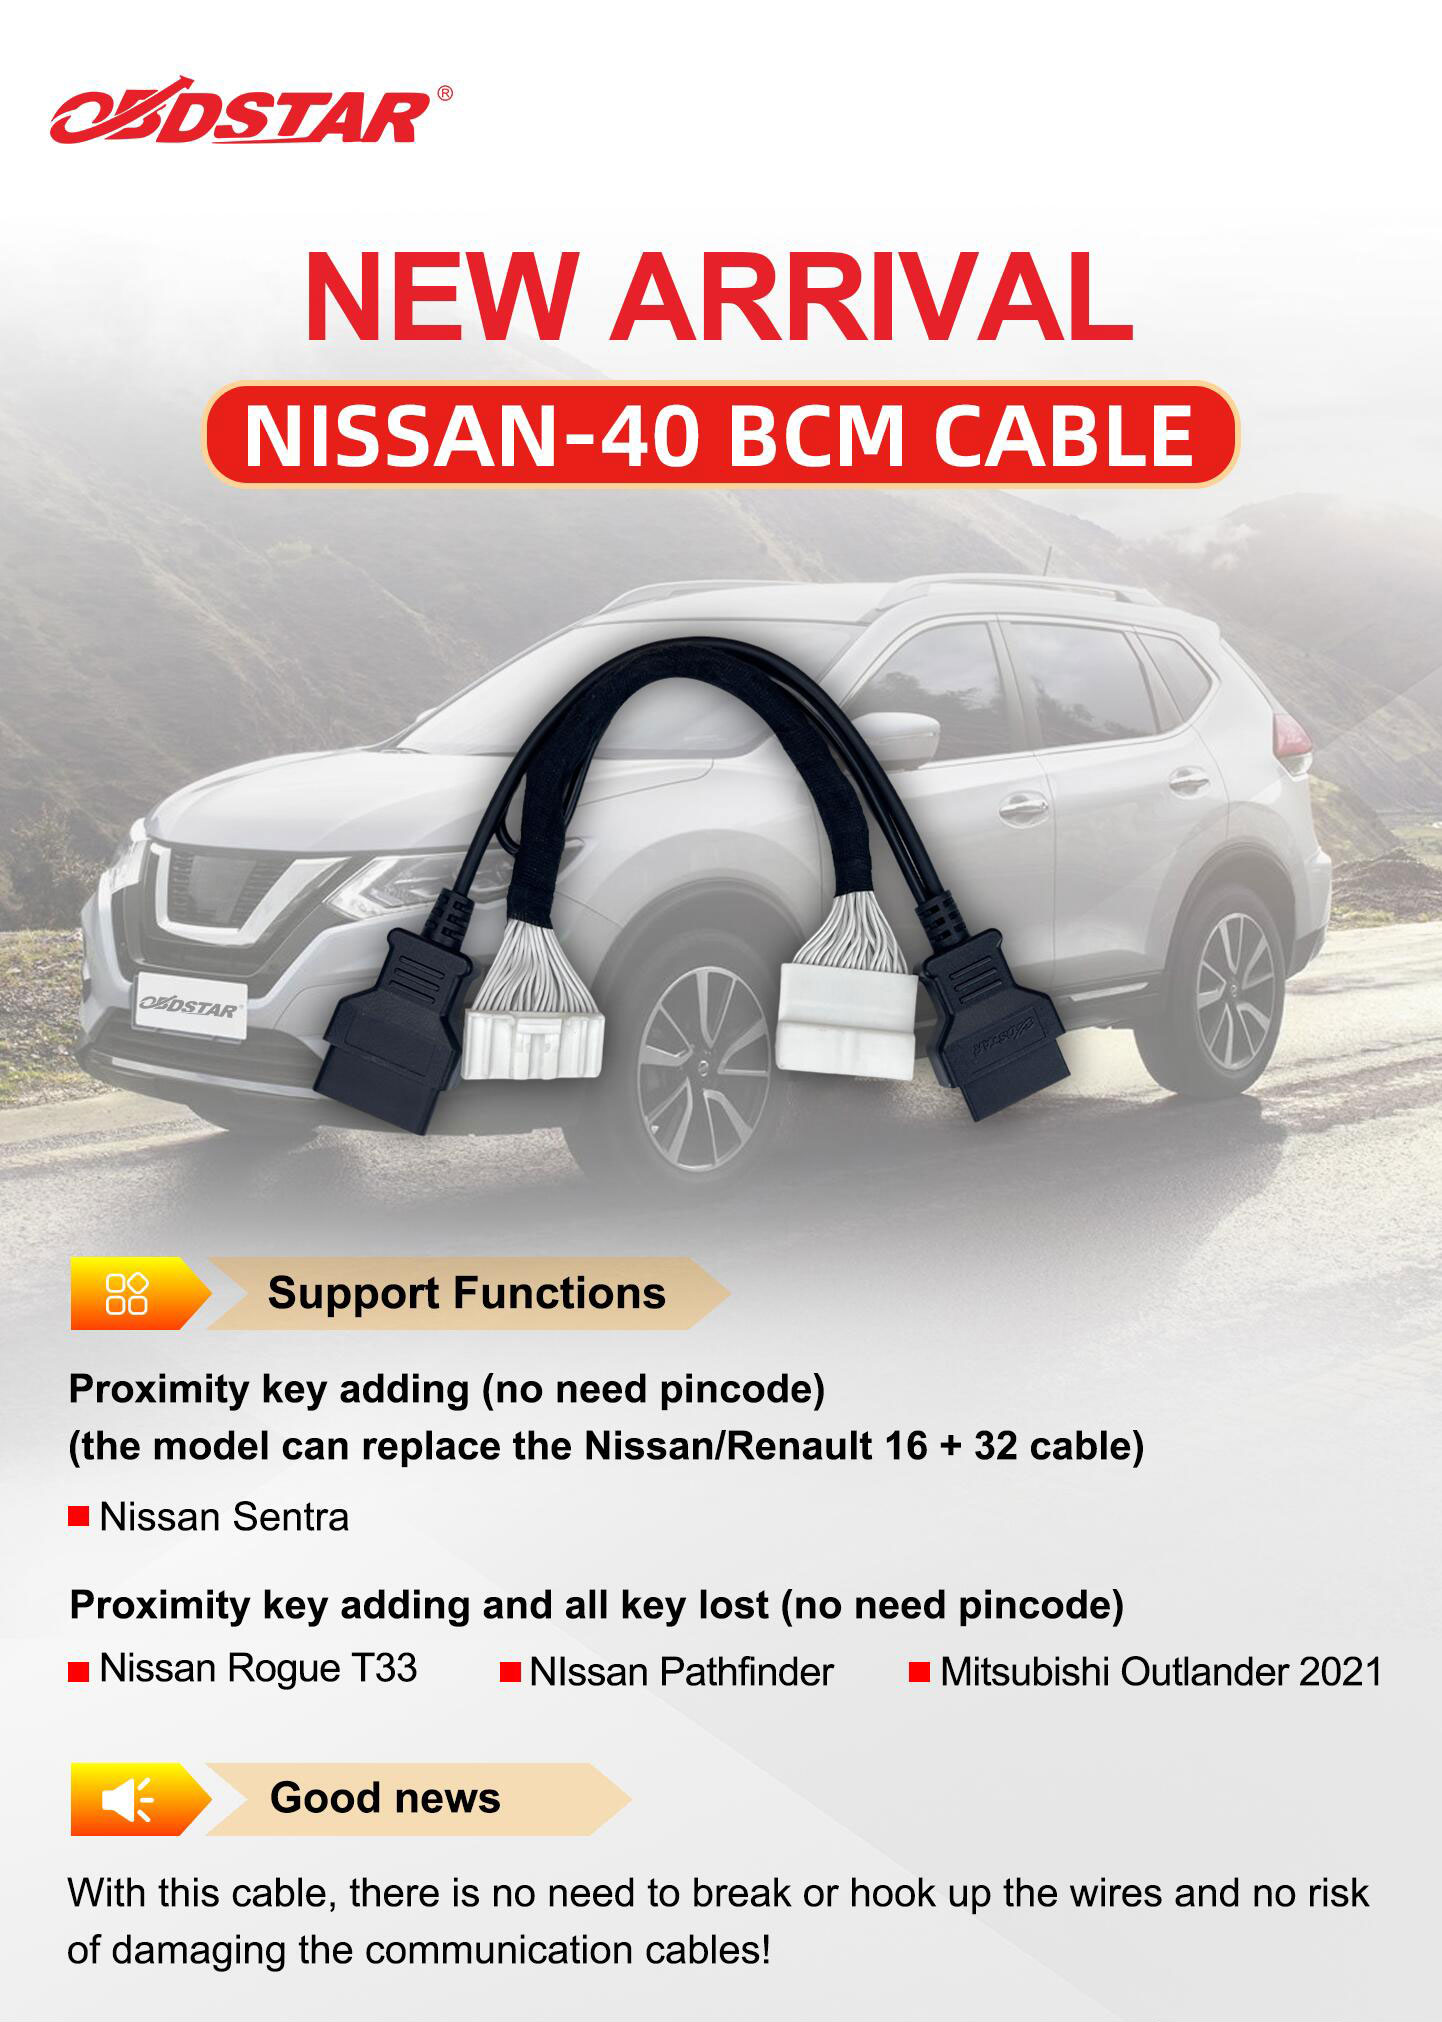 OBDSTAR NISSAN-40 BCM Cable